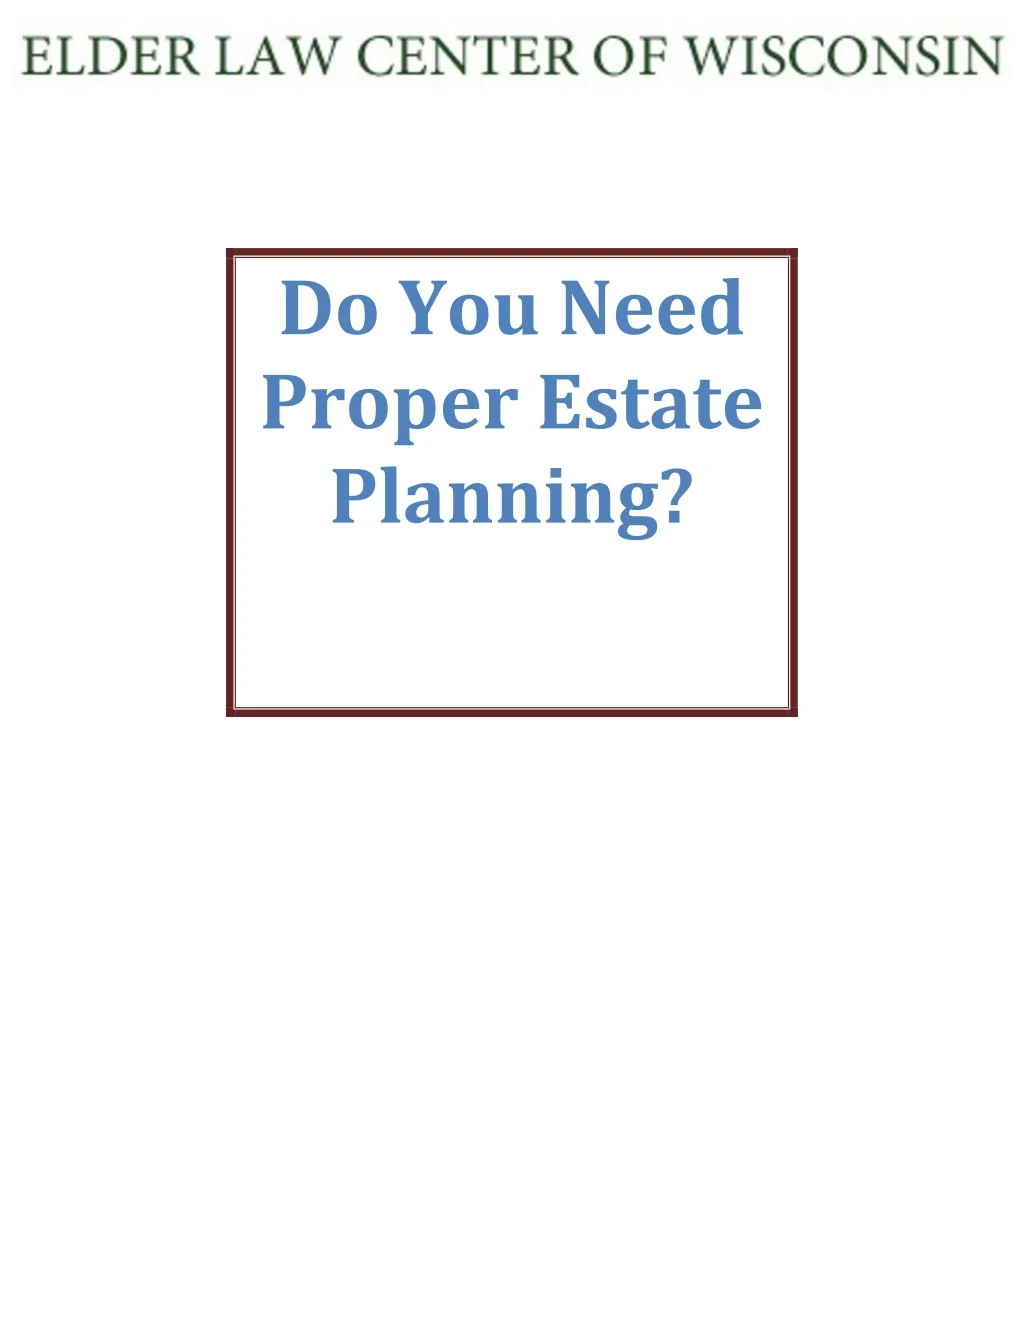 do you need proper estate planning